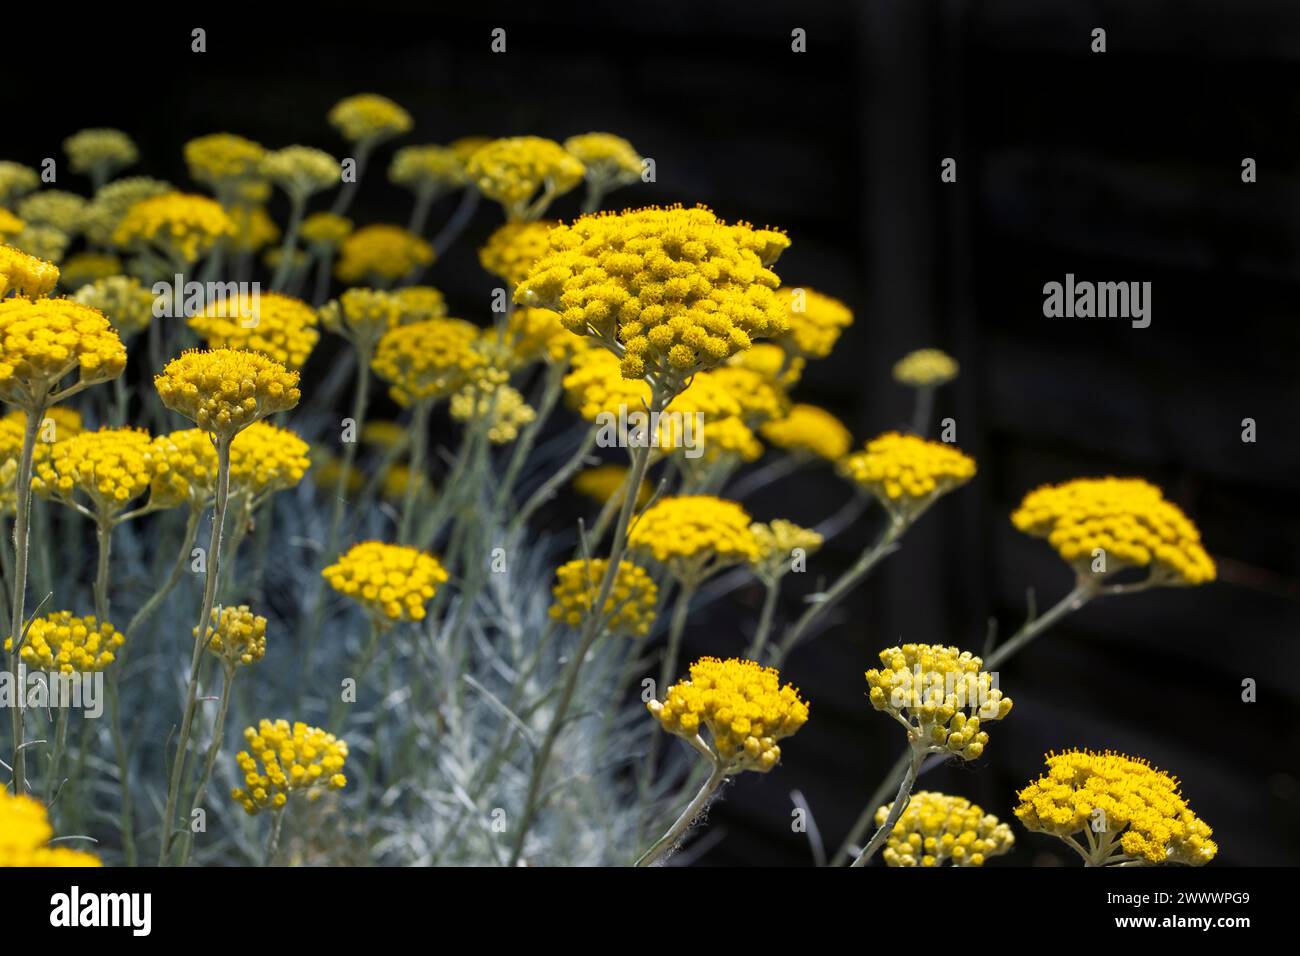 The bright yellow flowers of Helichrysum italicumin close-up against a contrasting dark background. Also known as Curry Plant or Italian Straw flower. Stock Photo